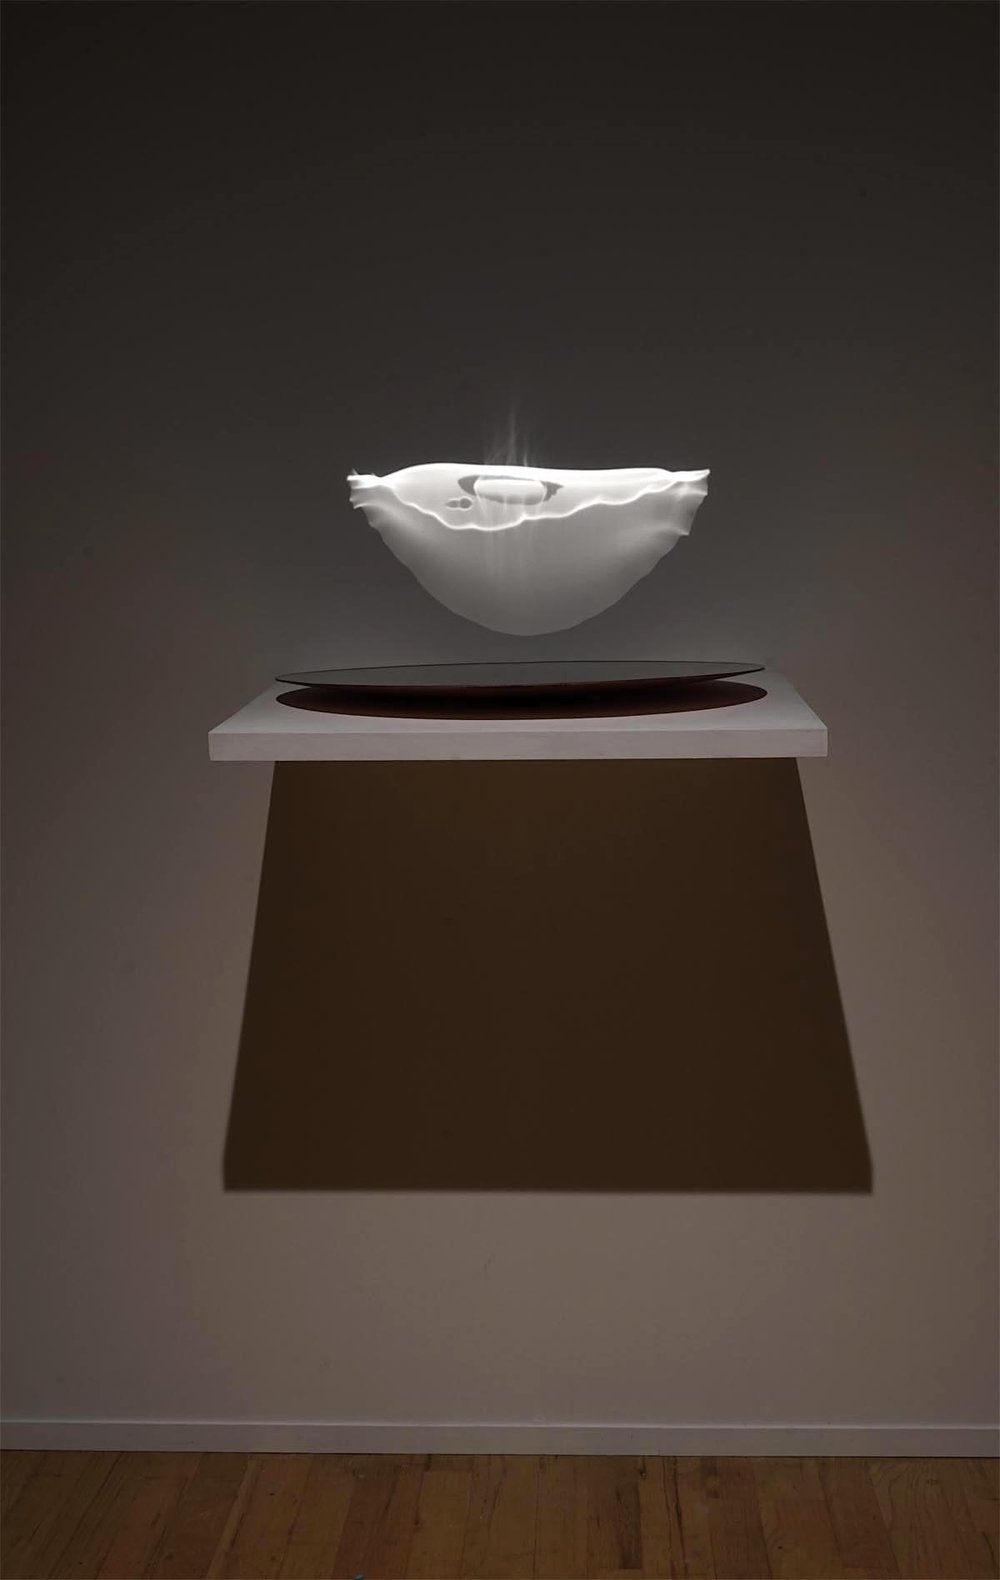 FOLDING (2019) | Glass, wood, water, LED light | 32 × 22 × 18 in.